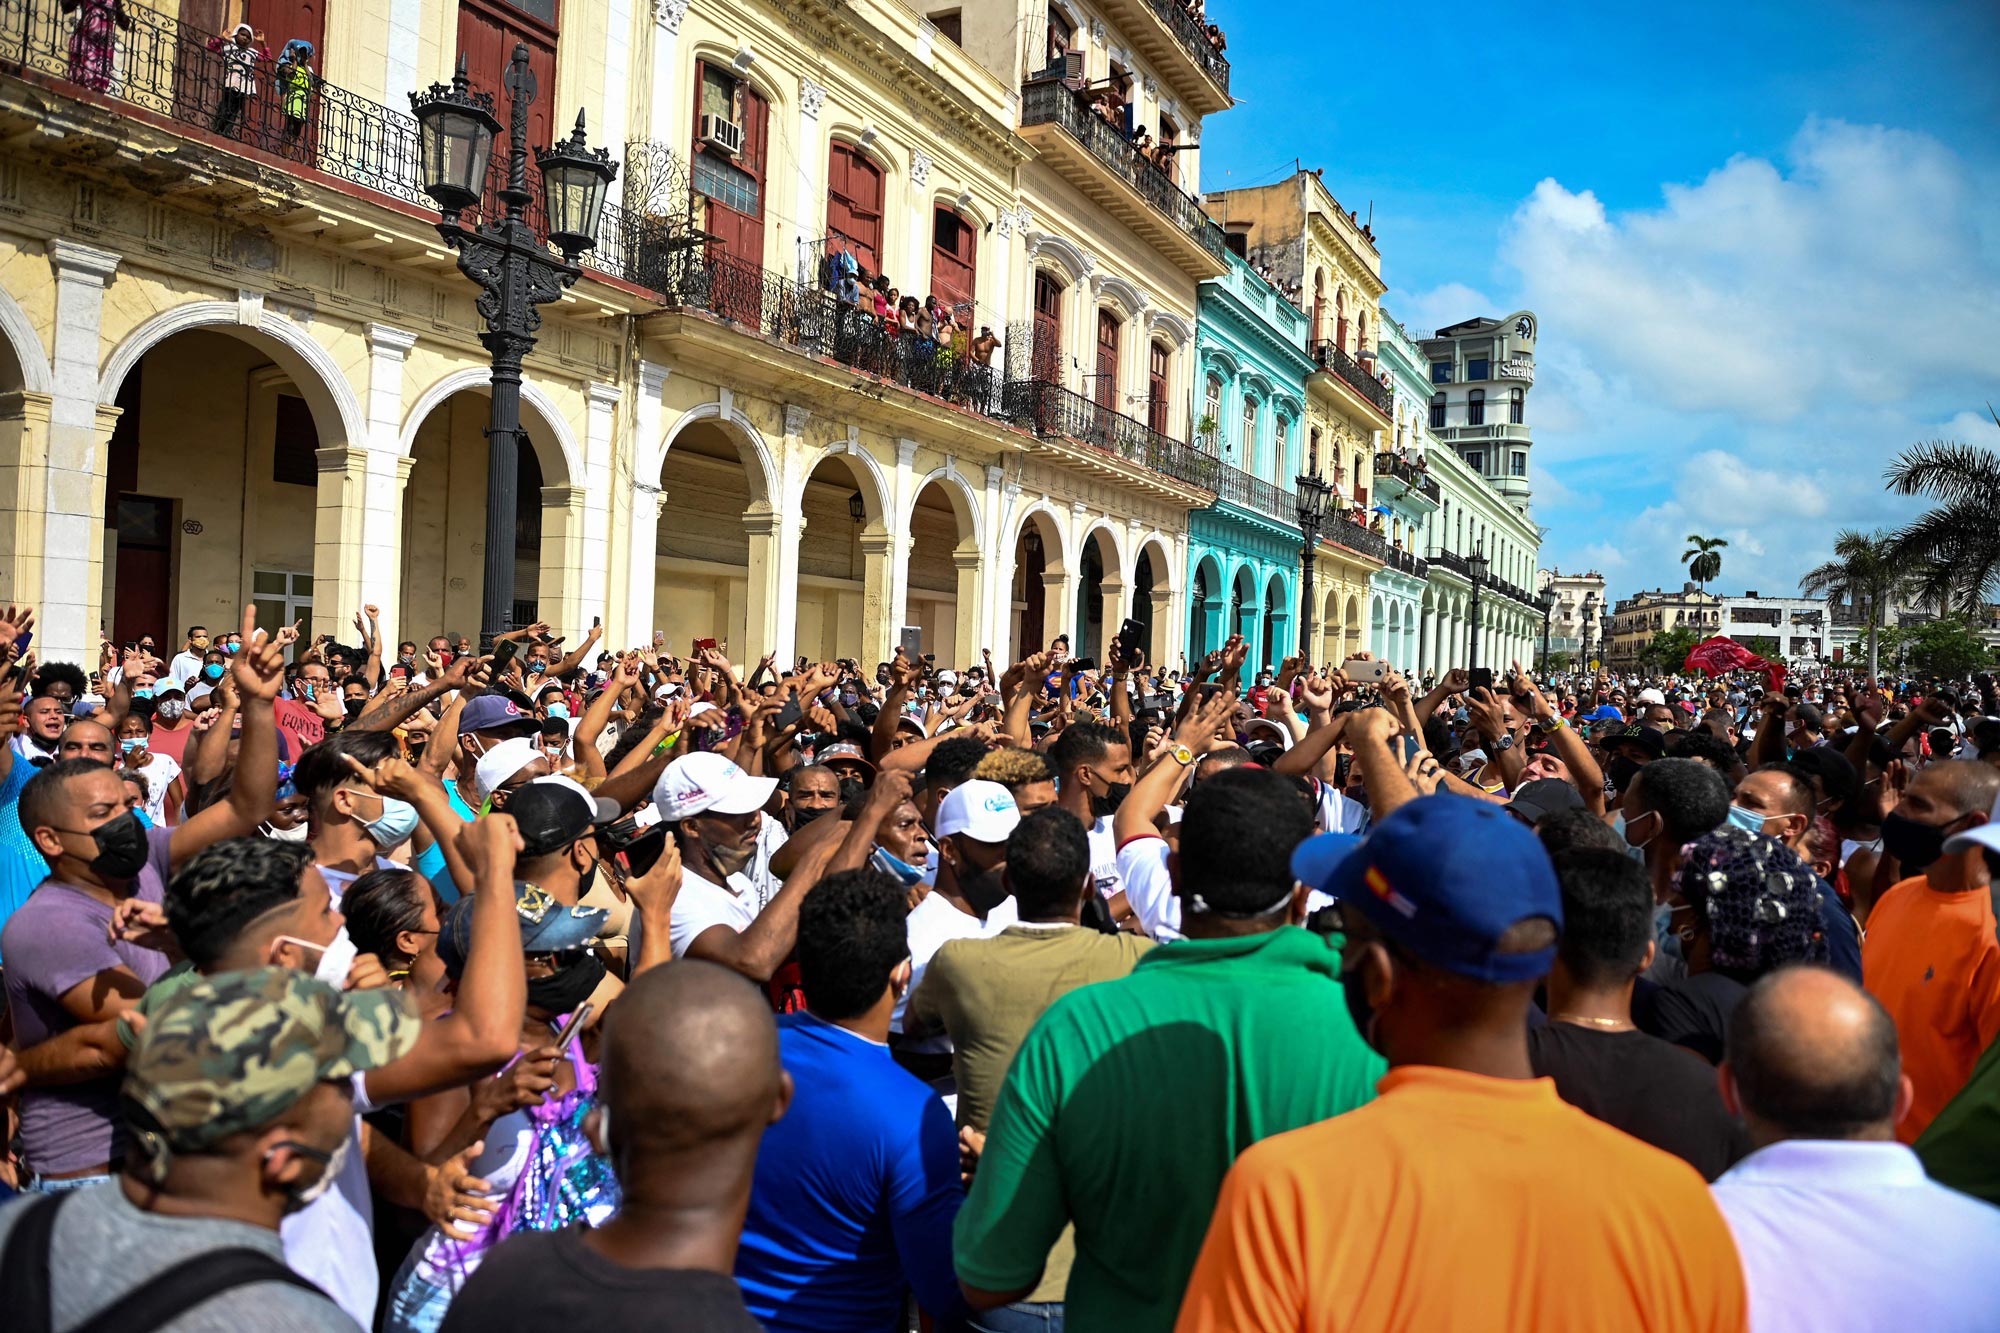 Cubans flooding the streets in protest of President Miguel Diaz-Canel